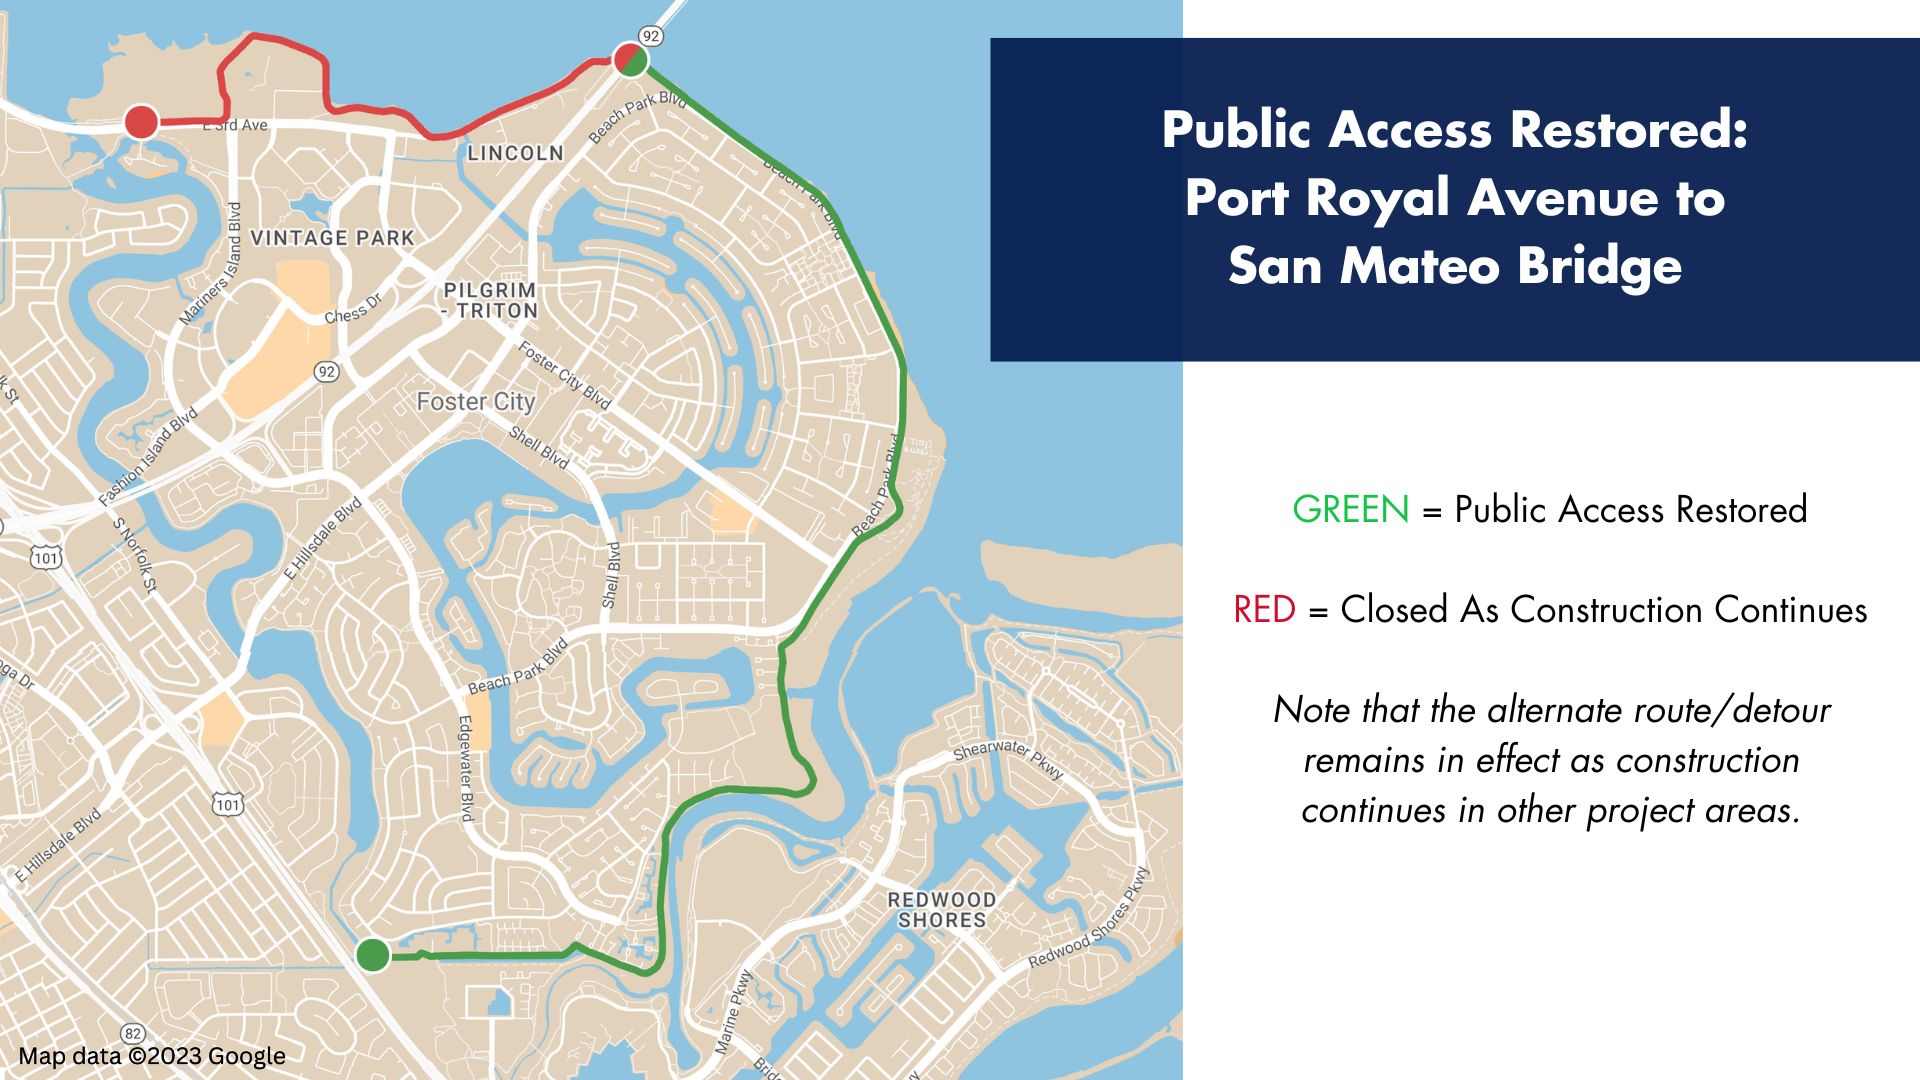 Public Access Map - Restored Access to Phase 2 from Port Royal Avenue to San Mateo Bridge